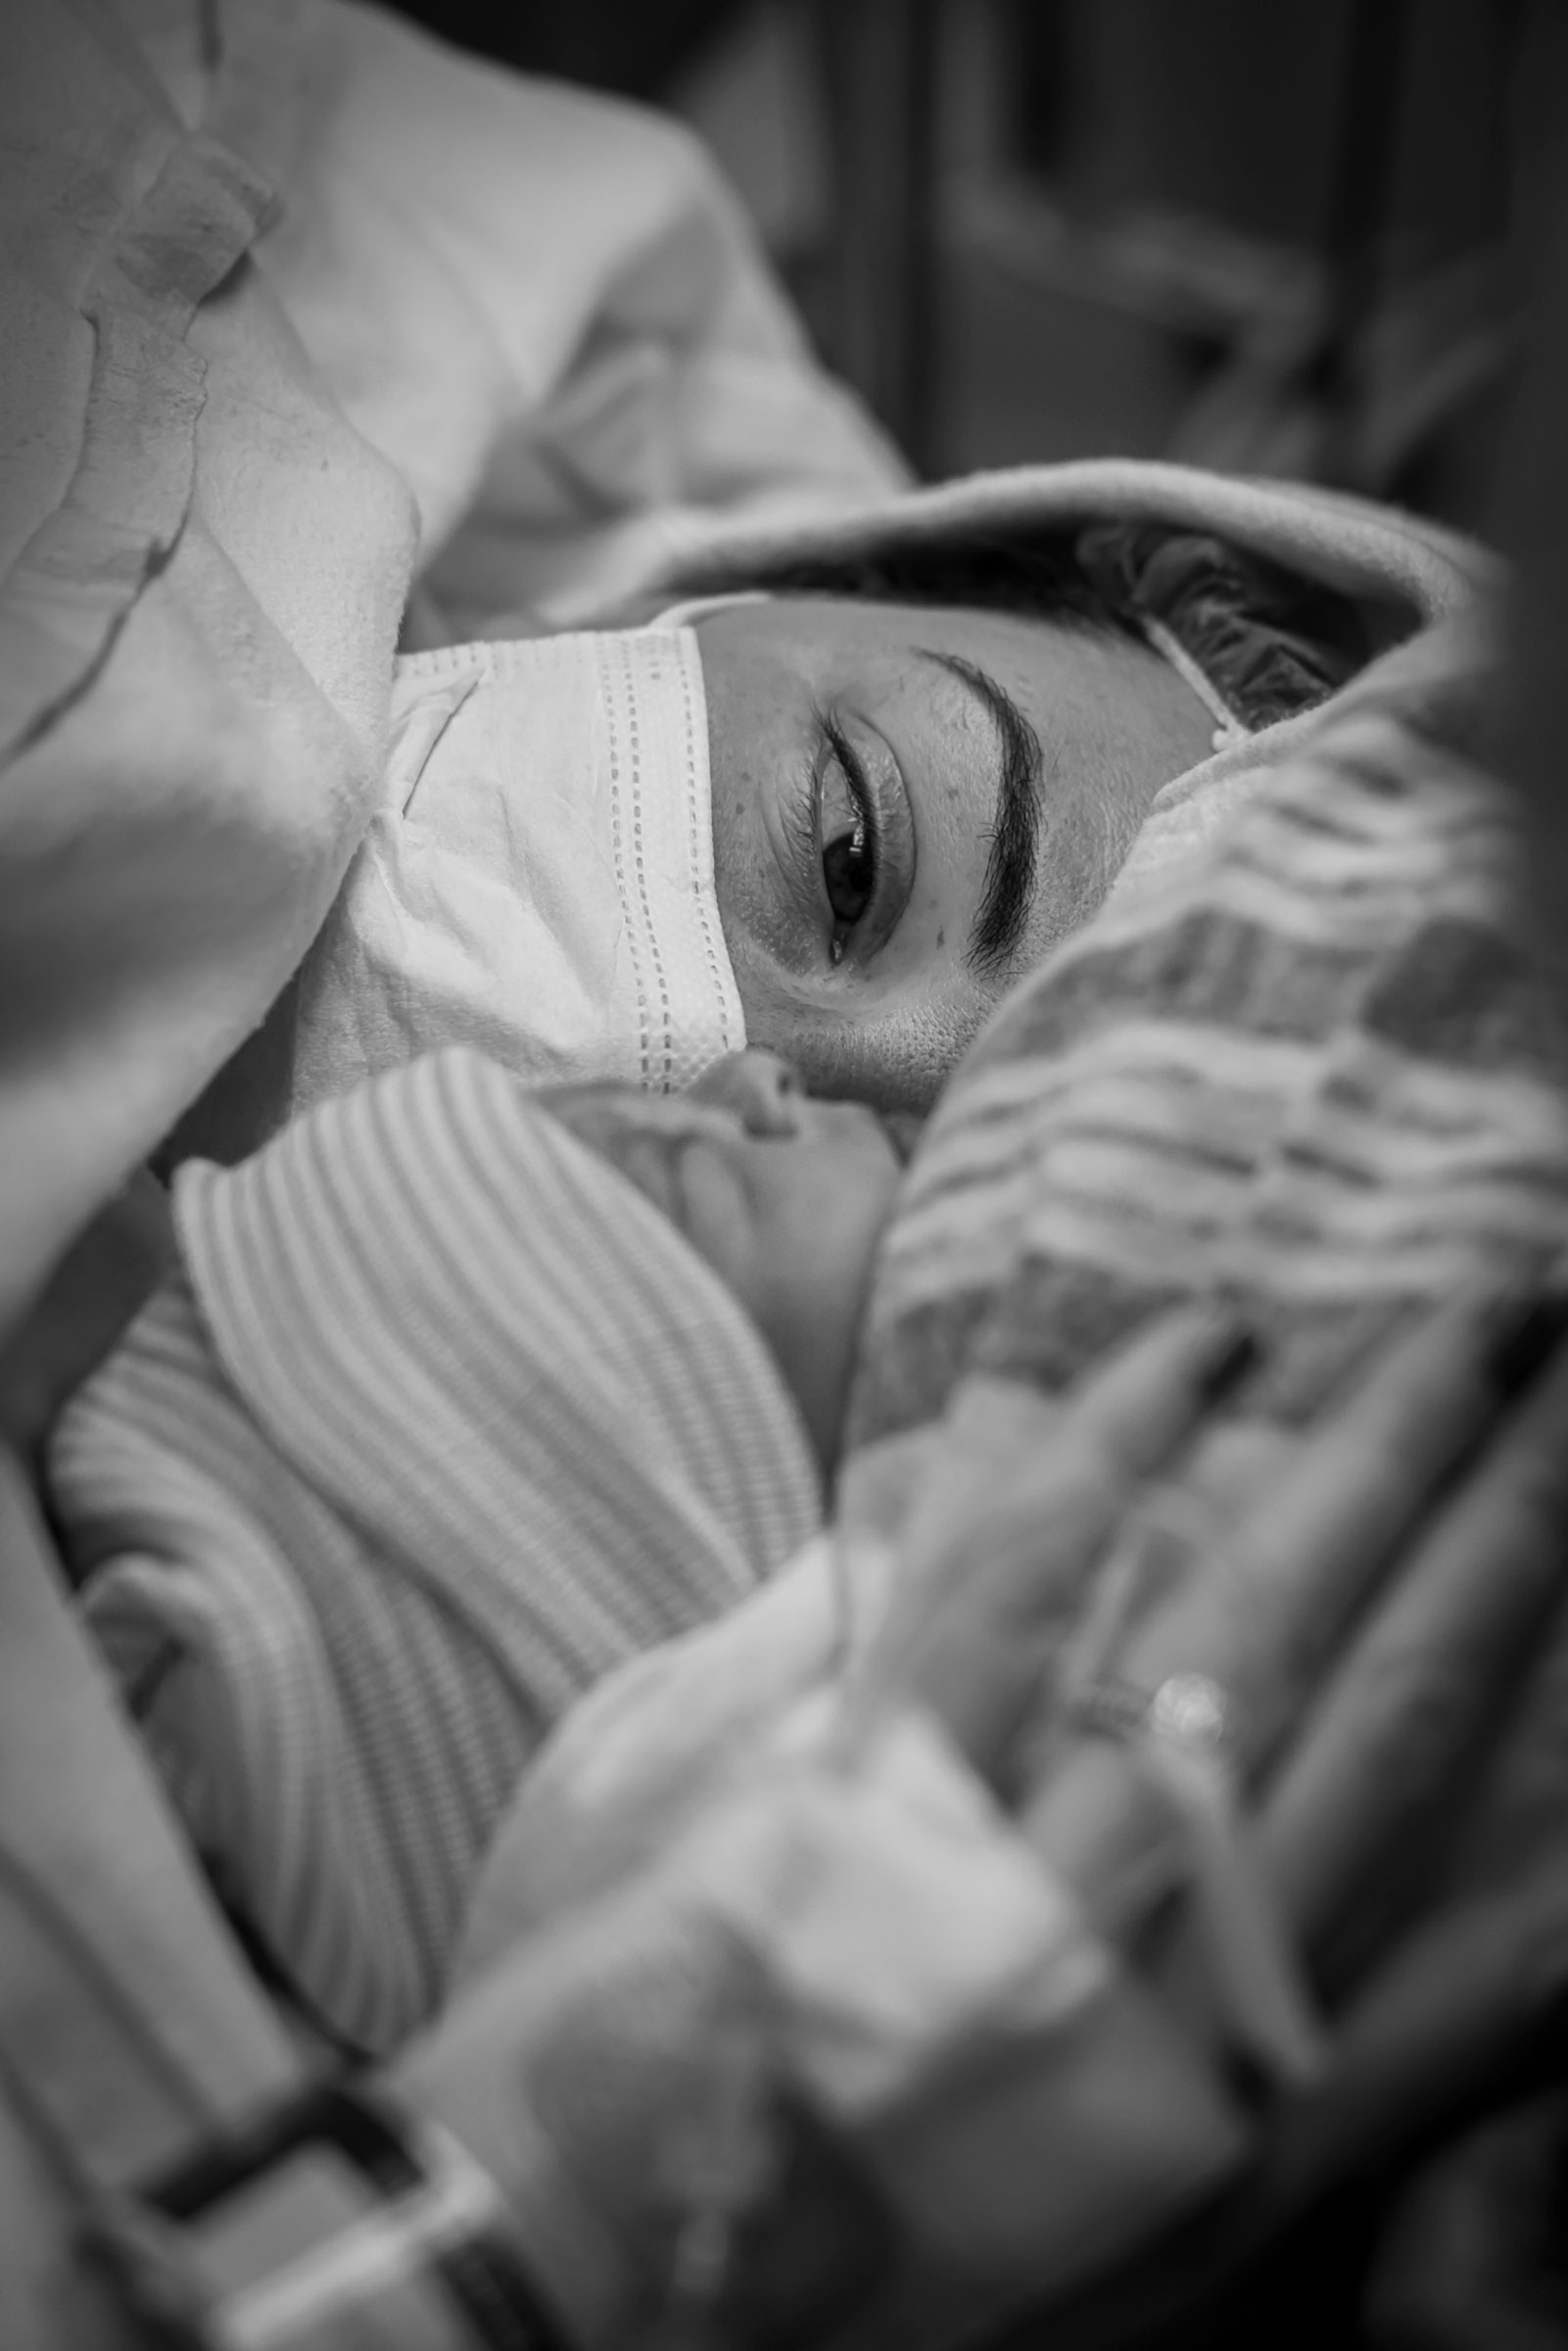 Megan Keeton, 31, immediately after a cesarean-section delivery. Complications from two earlier pregnancies, one resulting in a stillbirth, the other in the birth of her daughter, Aryia, now 7, who has spastic quadriplegia cerebral palsy led doctors to tell Keeton she should not become pregnant again because of the risks to her health. But just before she was going to make an appointment to get her tubes tied late last year, she found out she was pregnant for a third time. "I was asked if I wanted to have an abortion, and I said no," Keeton says. (Stephanie Sinclair)